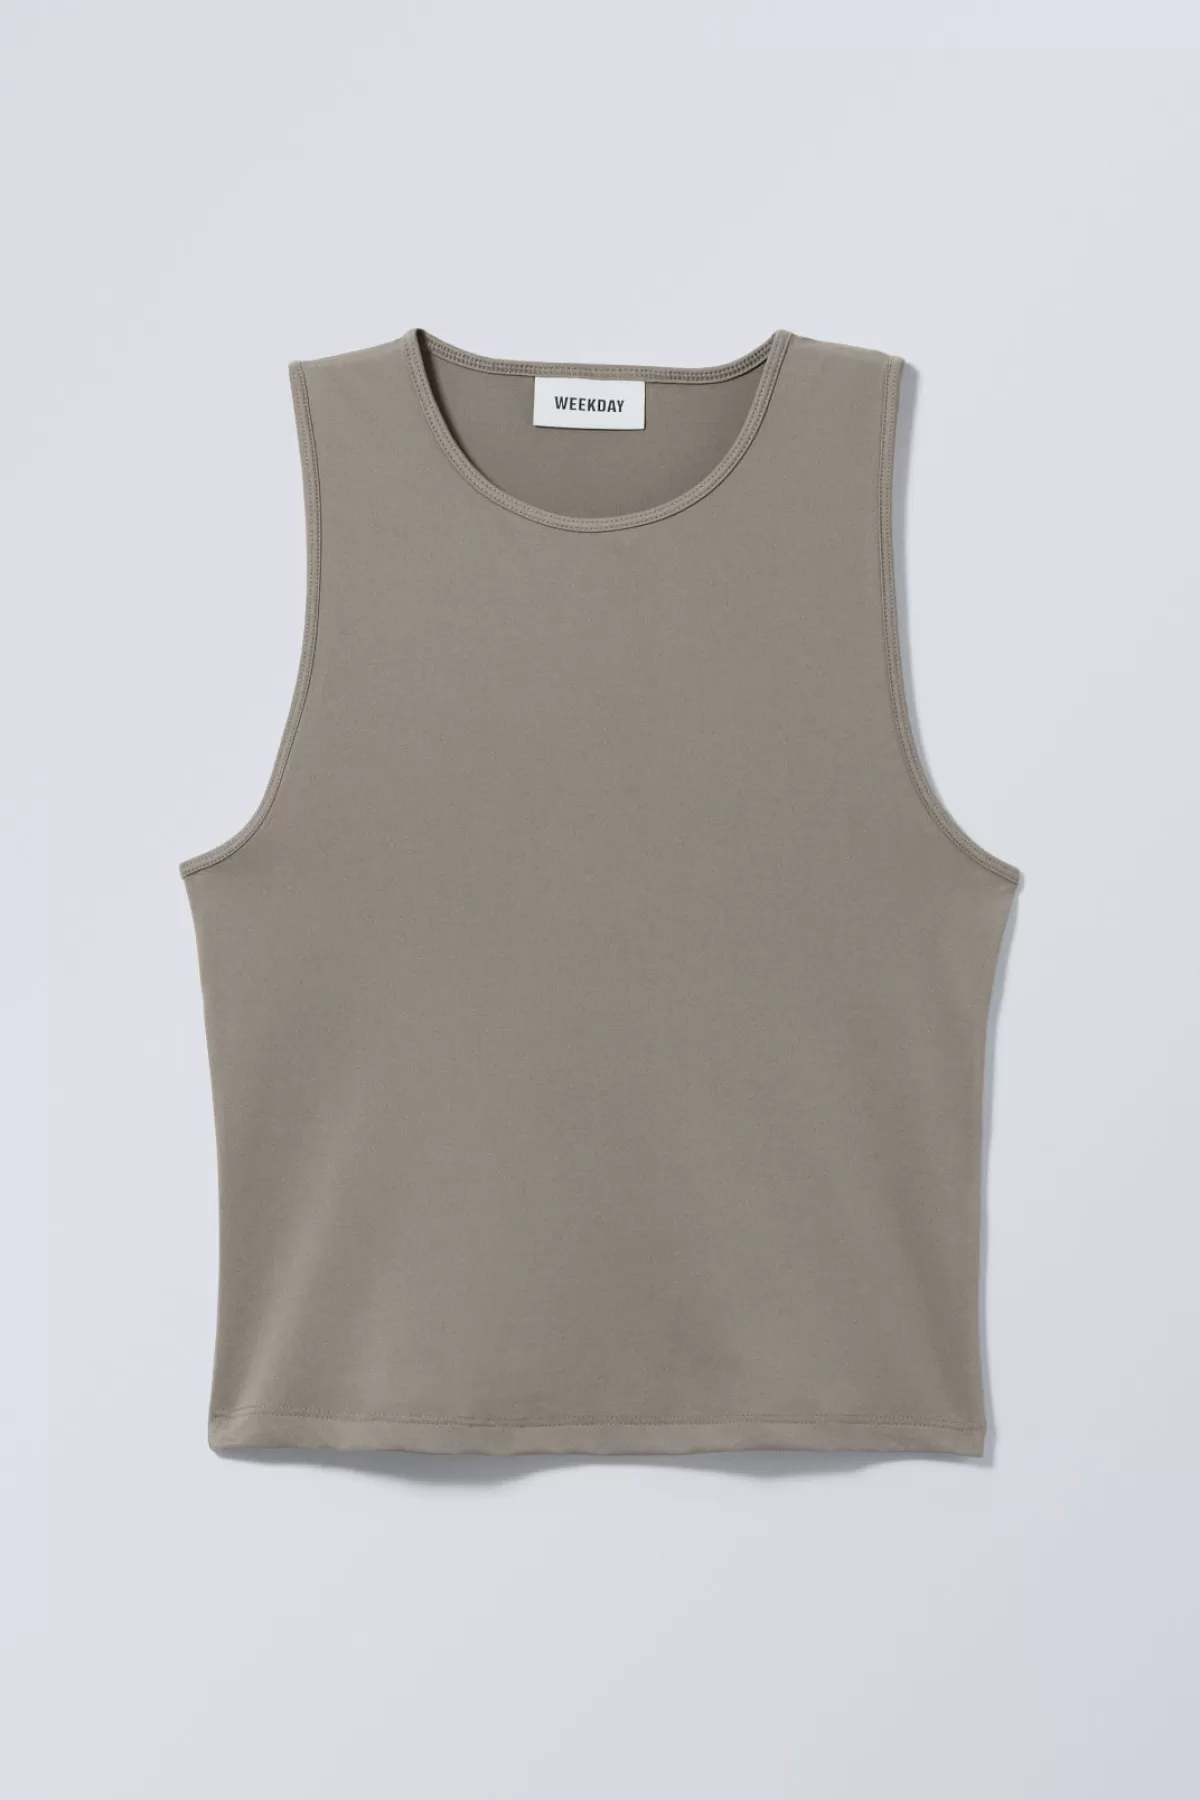 Weekday Fine Fitted Tank Top Grey Shop